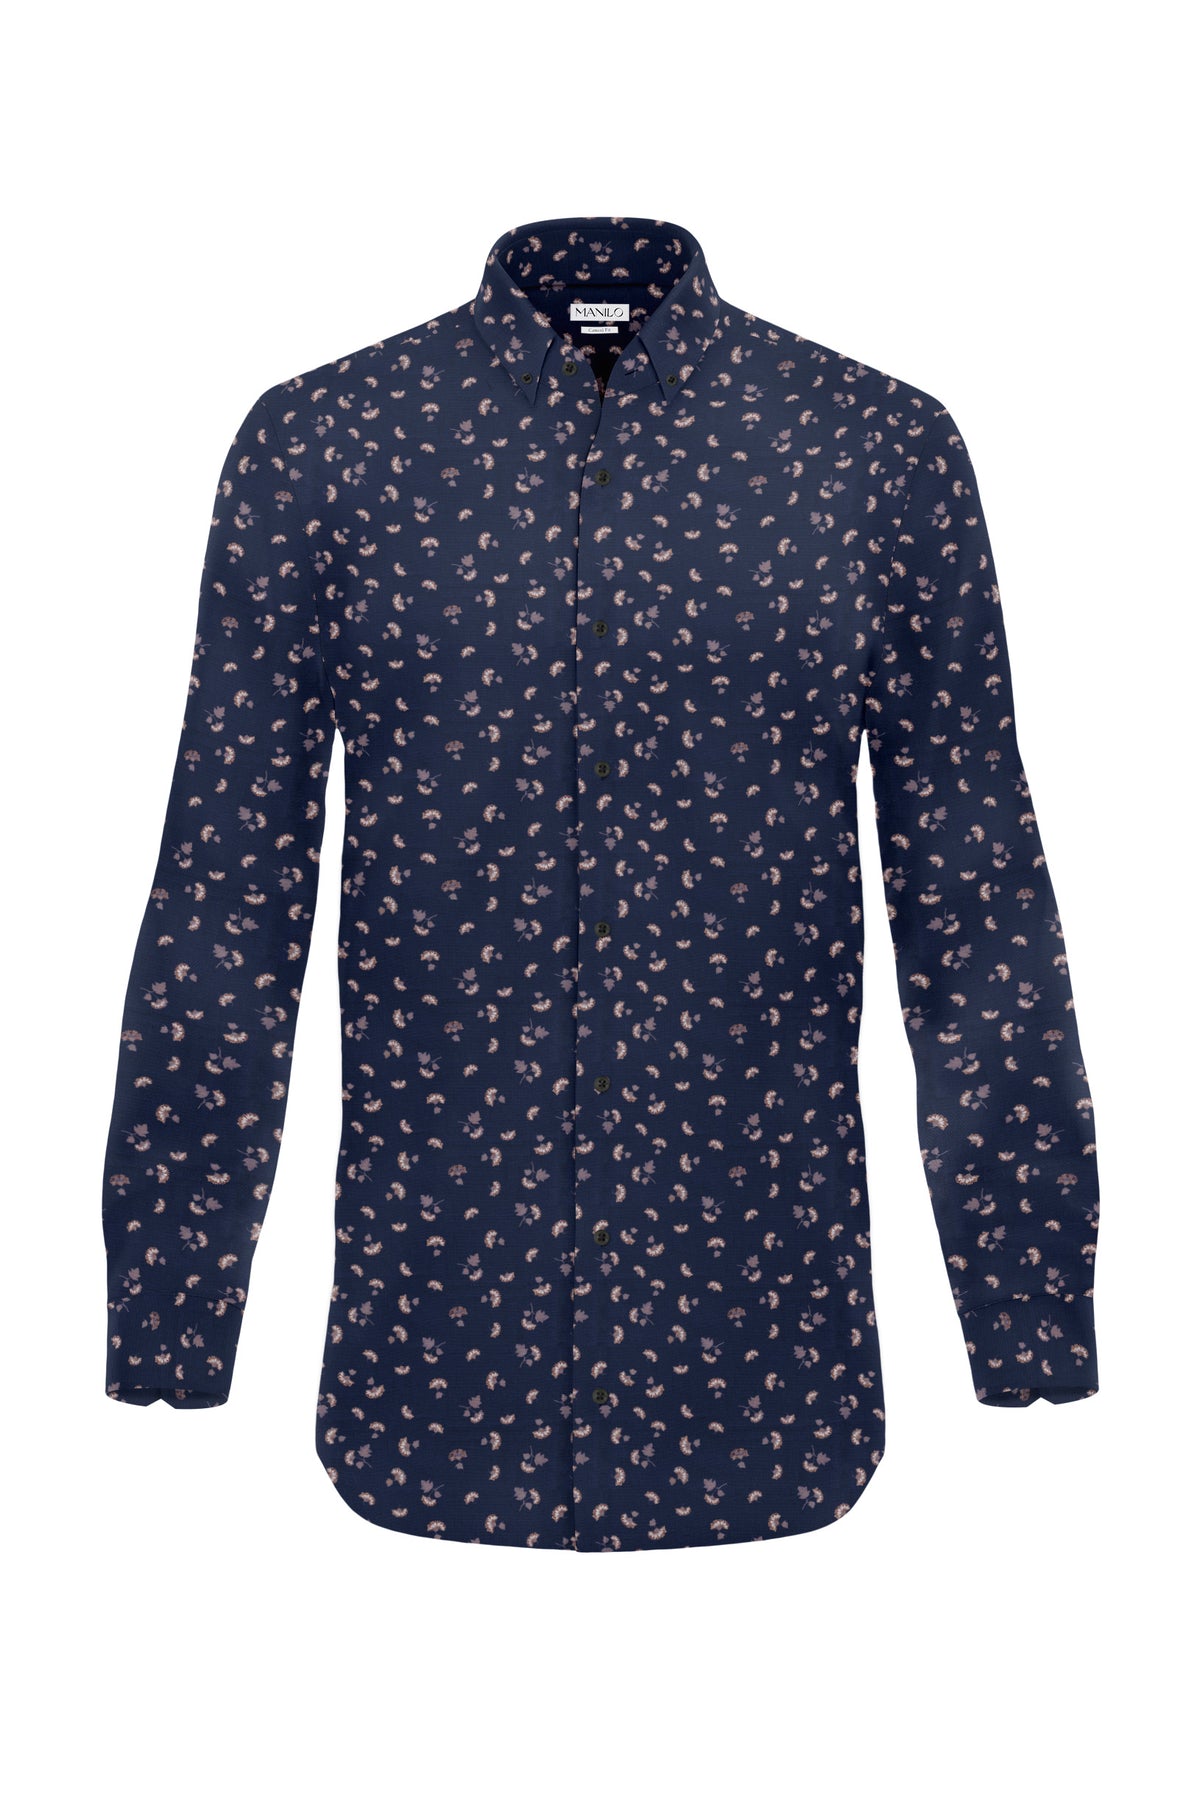 Printed casual shirt with floral pattern in navy/cognac (Art. 2102-C)